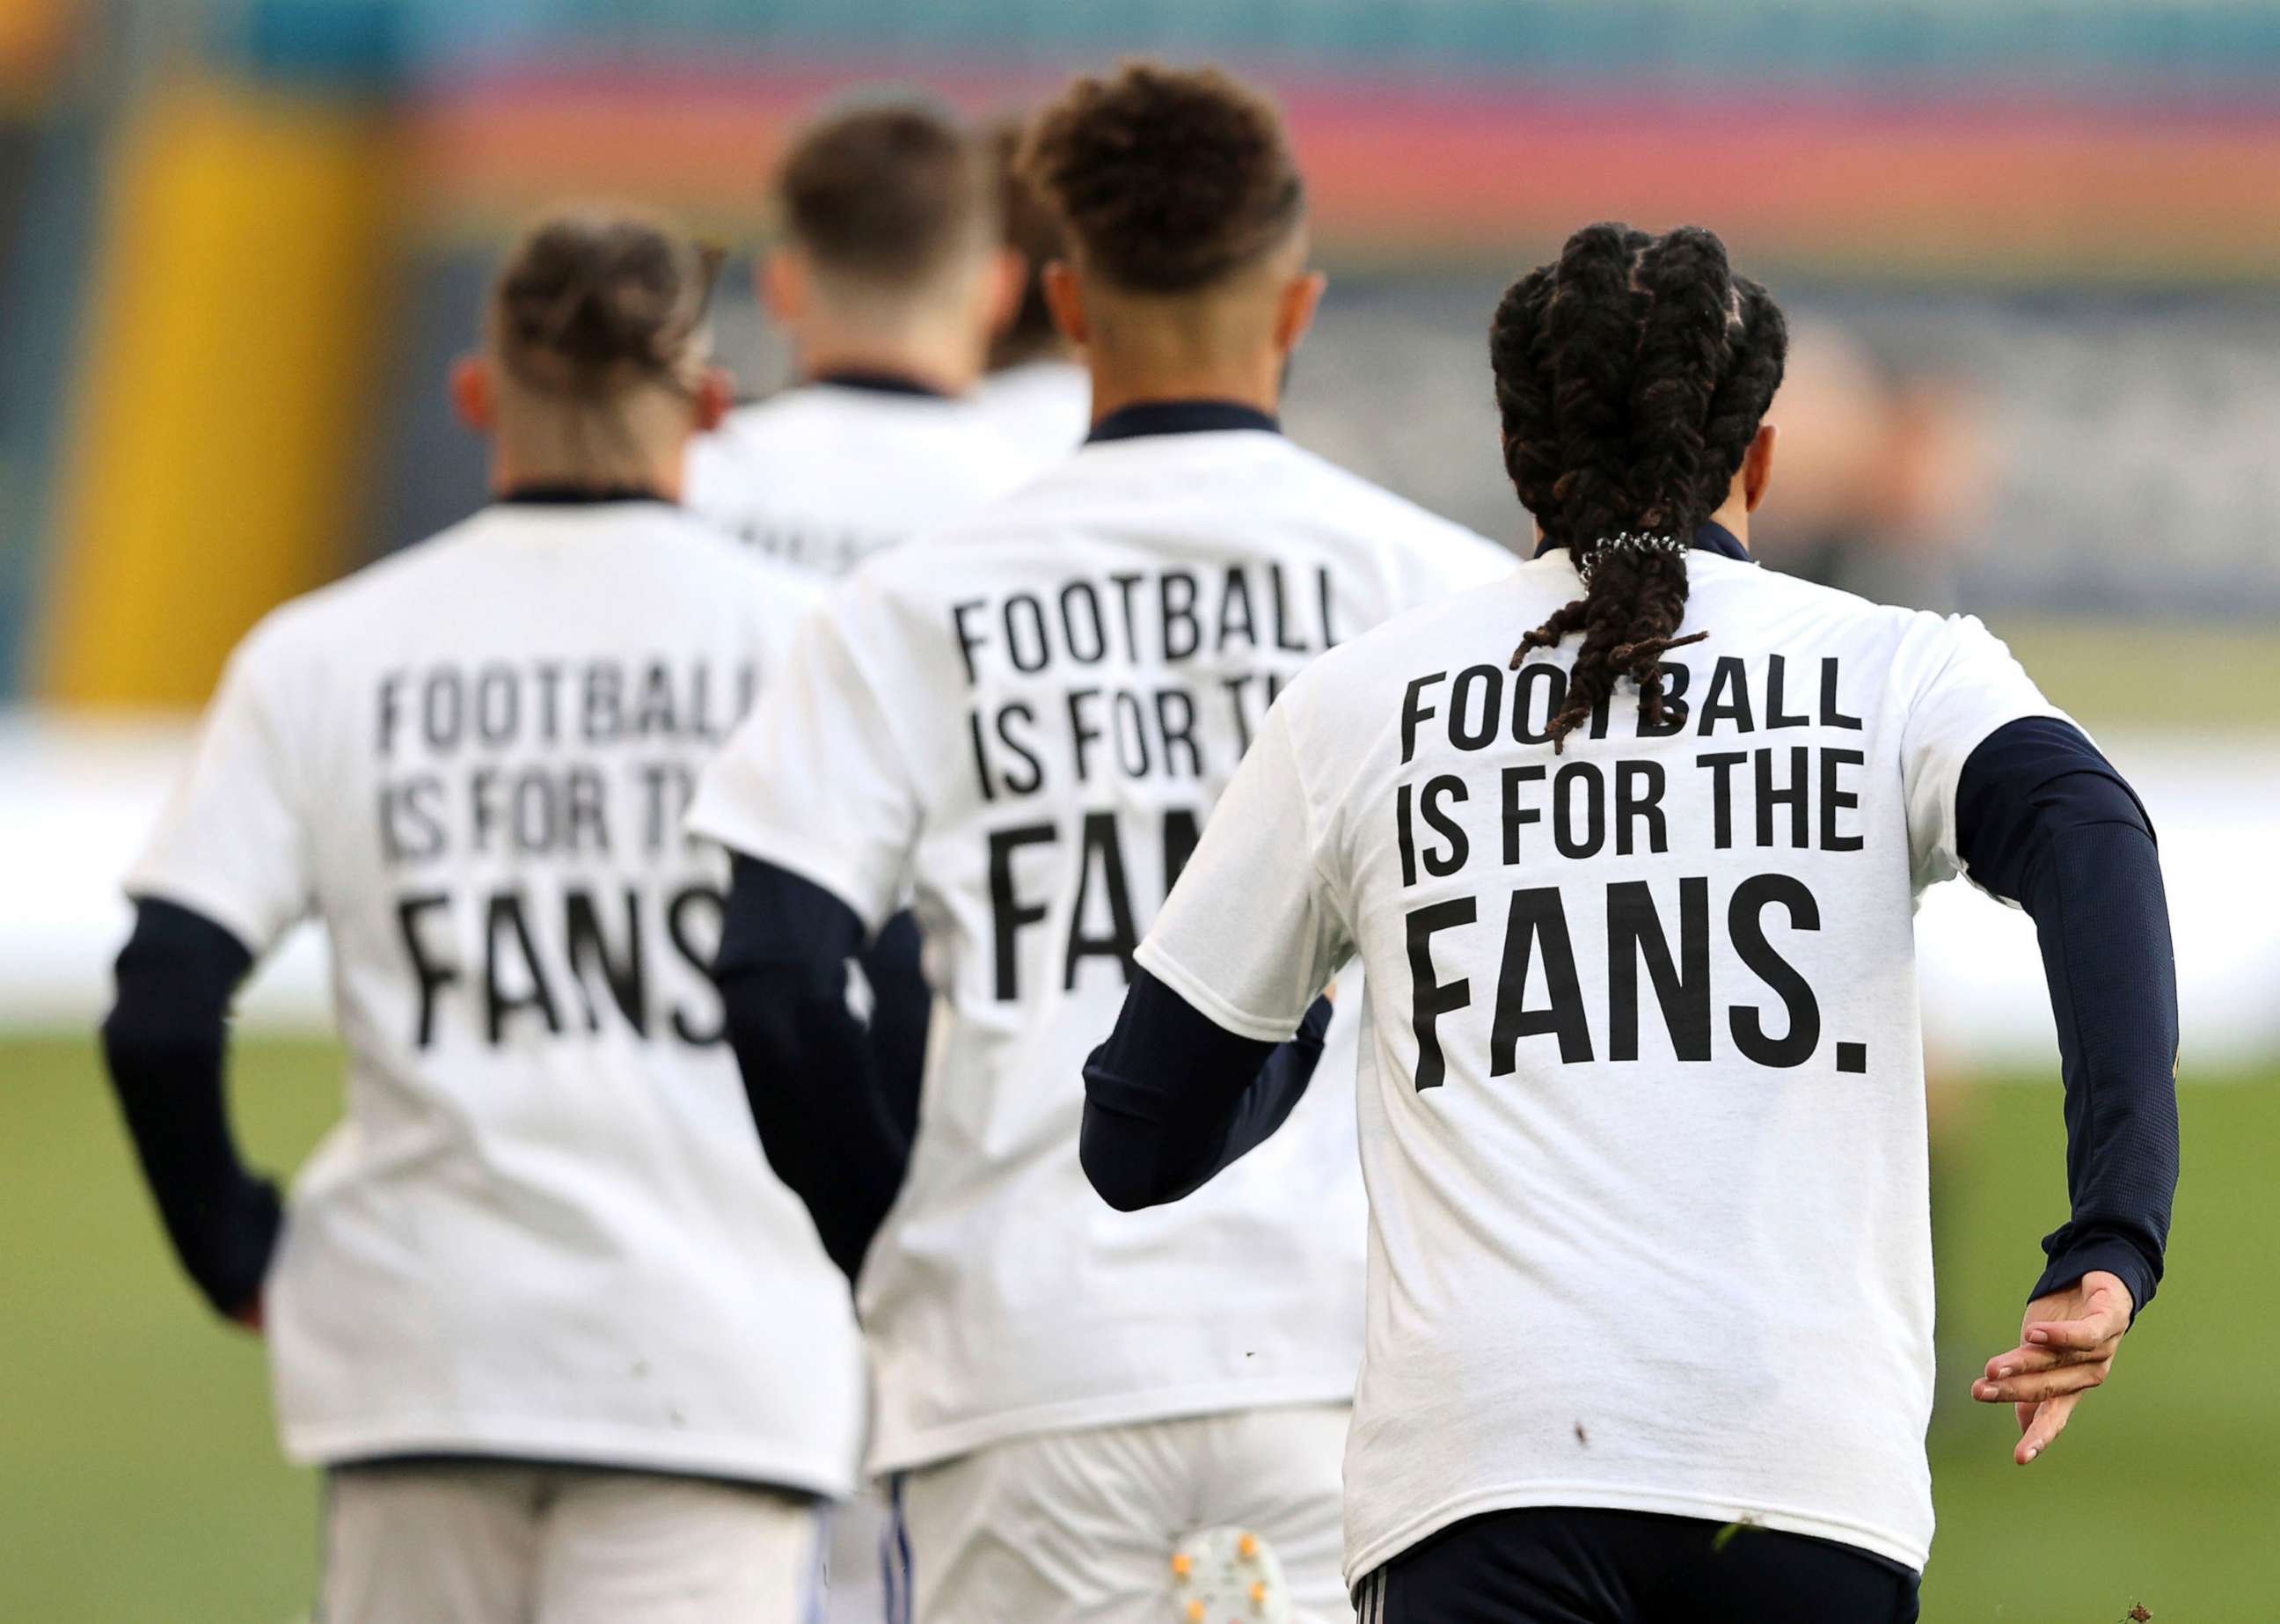 PHOTO: Leeds United players wear t-shirts with the logo 'Football Is For The Fans' as they warm-up ahead of ahead of the English Premier League soccer match between Leeds United and Liverpool at the Elland Road stadium in Leeds, England, April 19, 2021.